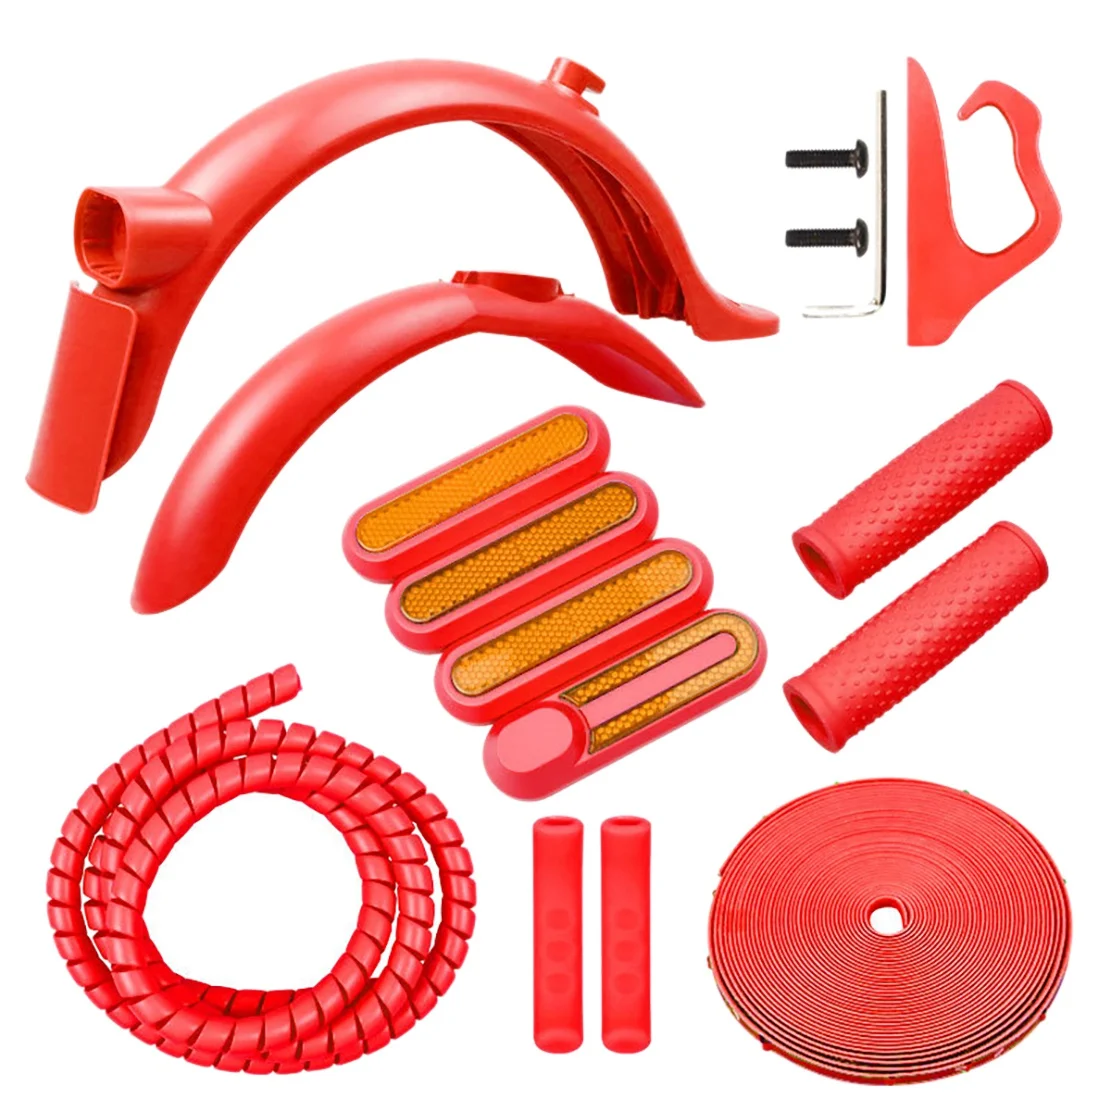 

Coloured Mudguard Kit for Xiaomi M365 1S Pro 2 Scooter Fender Line Tube Anti-Collision Strip Handlebar Grip 2